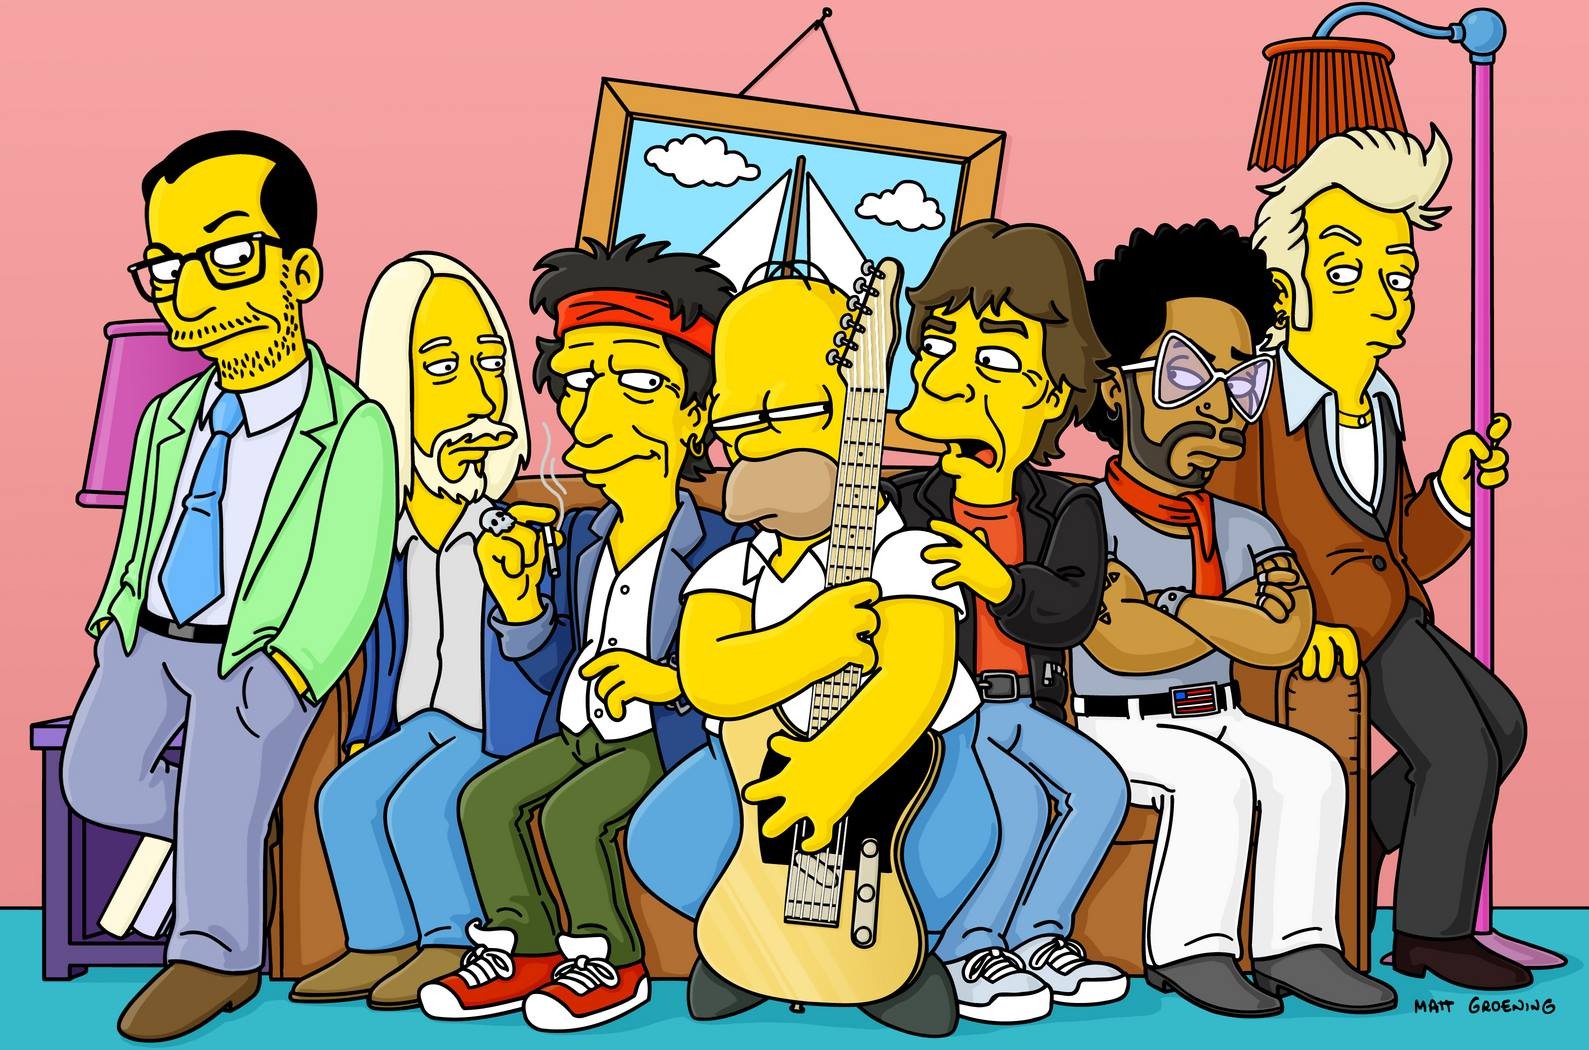 General 1589x1050 The Simpsons Homer Simpson cartoon humor musical instrument Mick Jagger Keith Richards Rolling Stones